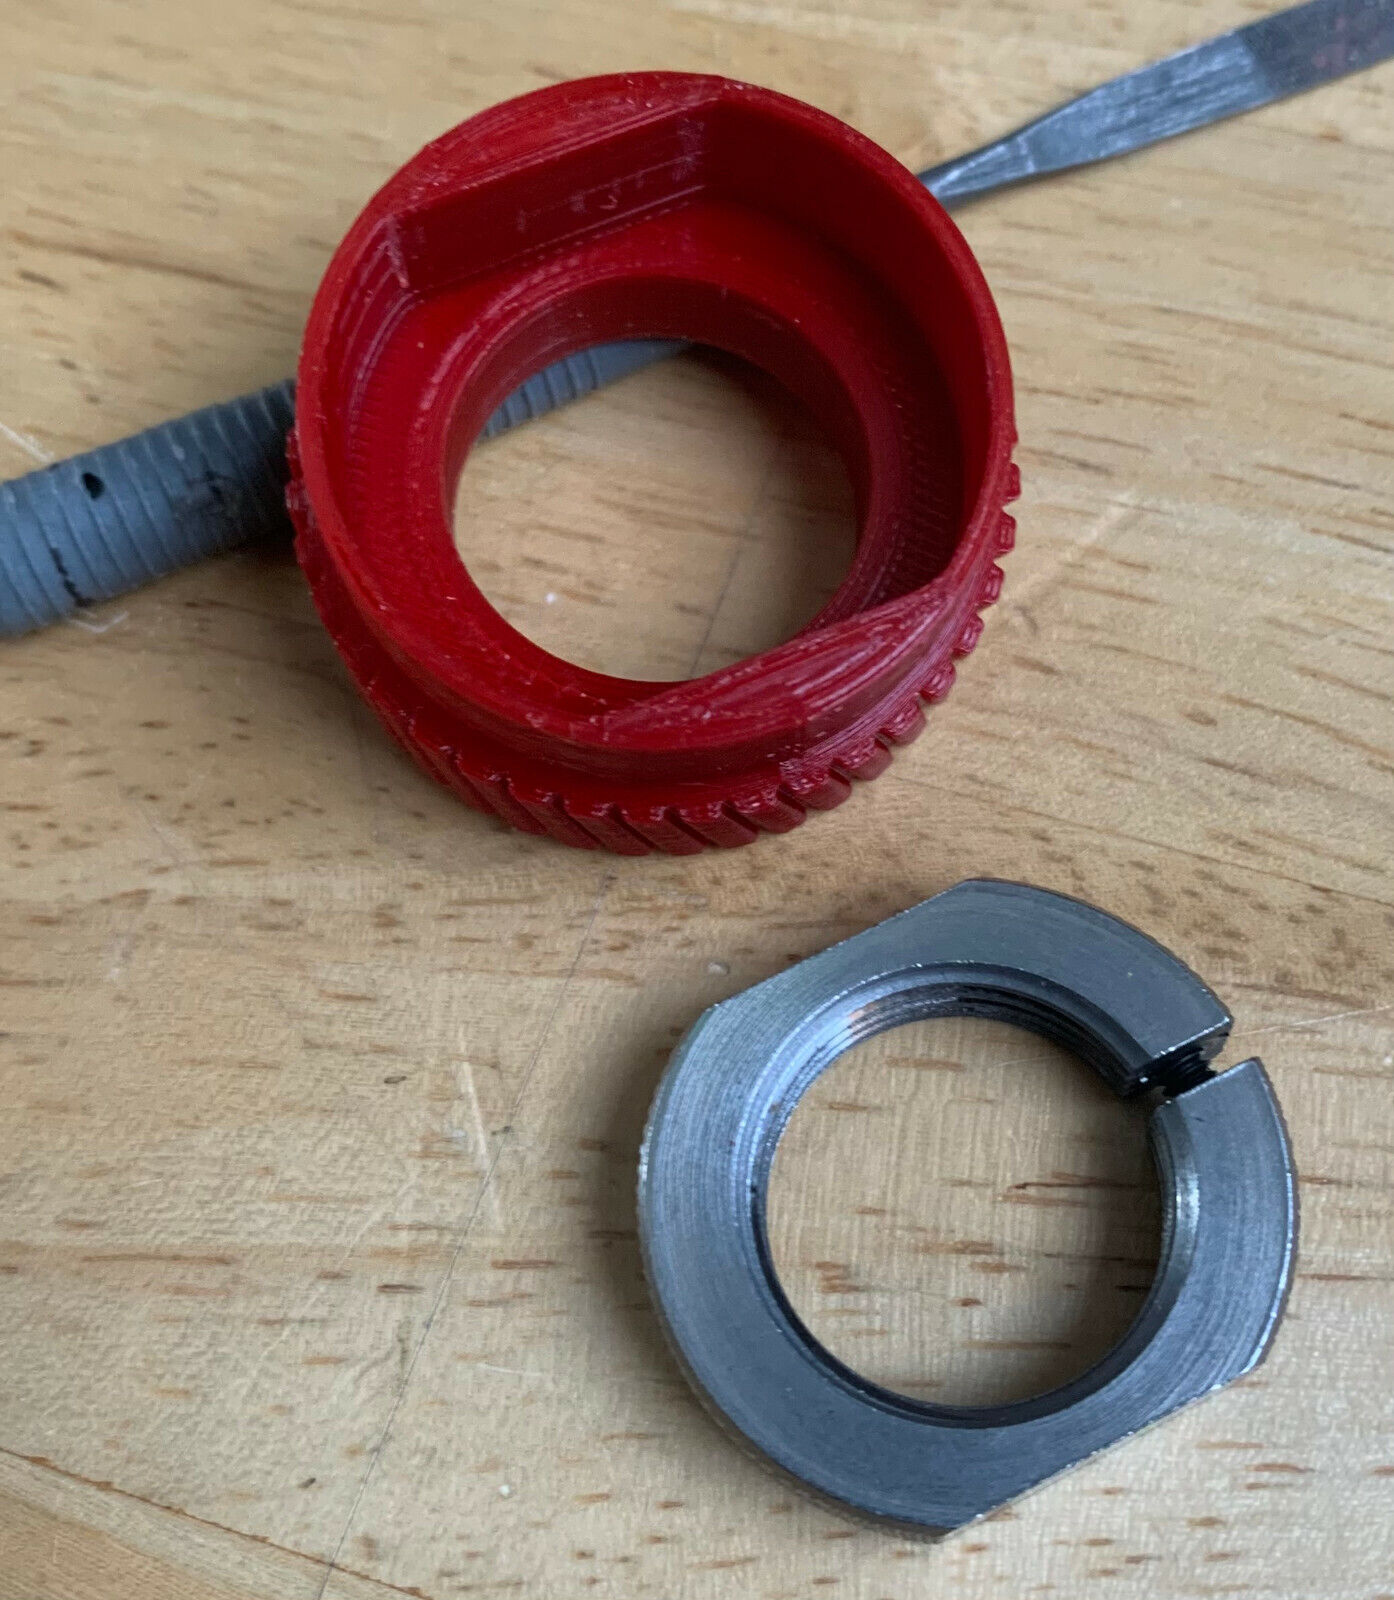 SURE-LOC DIE RING WRENCH / HORNADY / LEE / RCBS RELOADING PRESS - LOCK RING Unbranded Does Not Apply